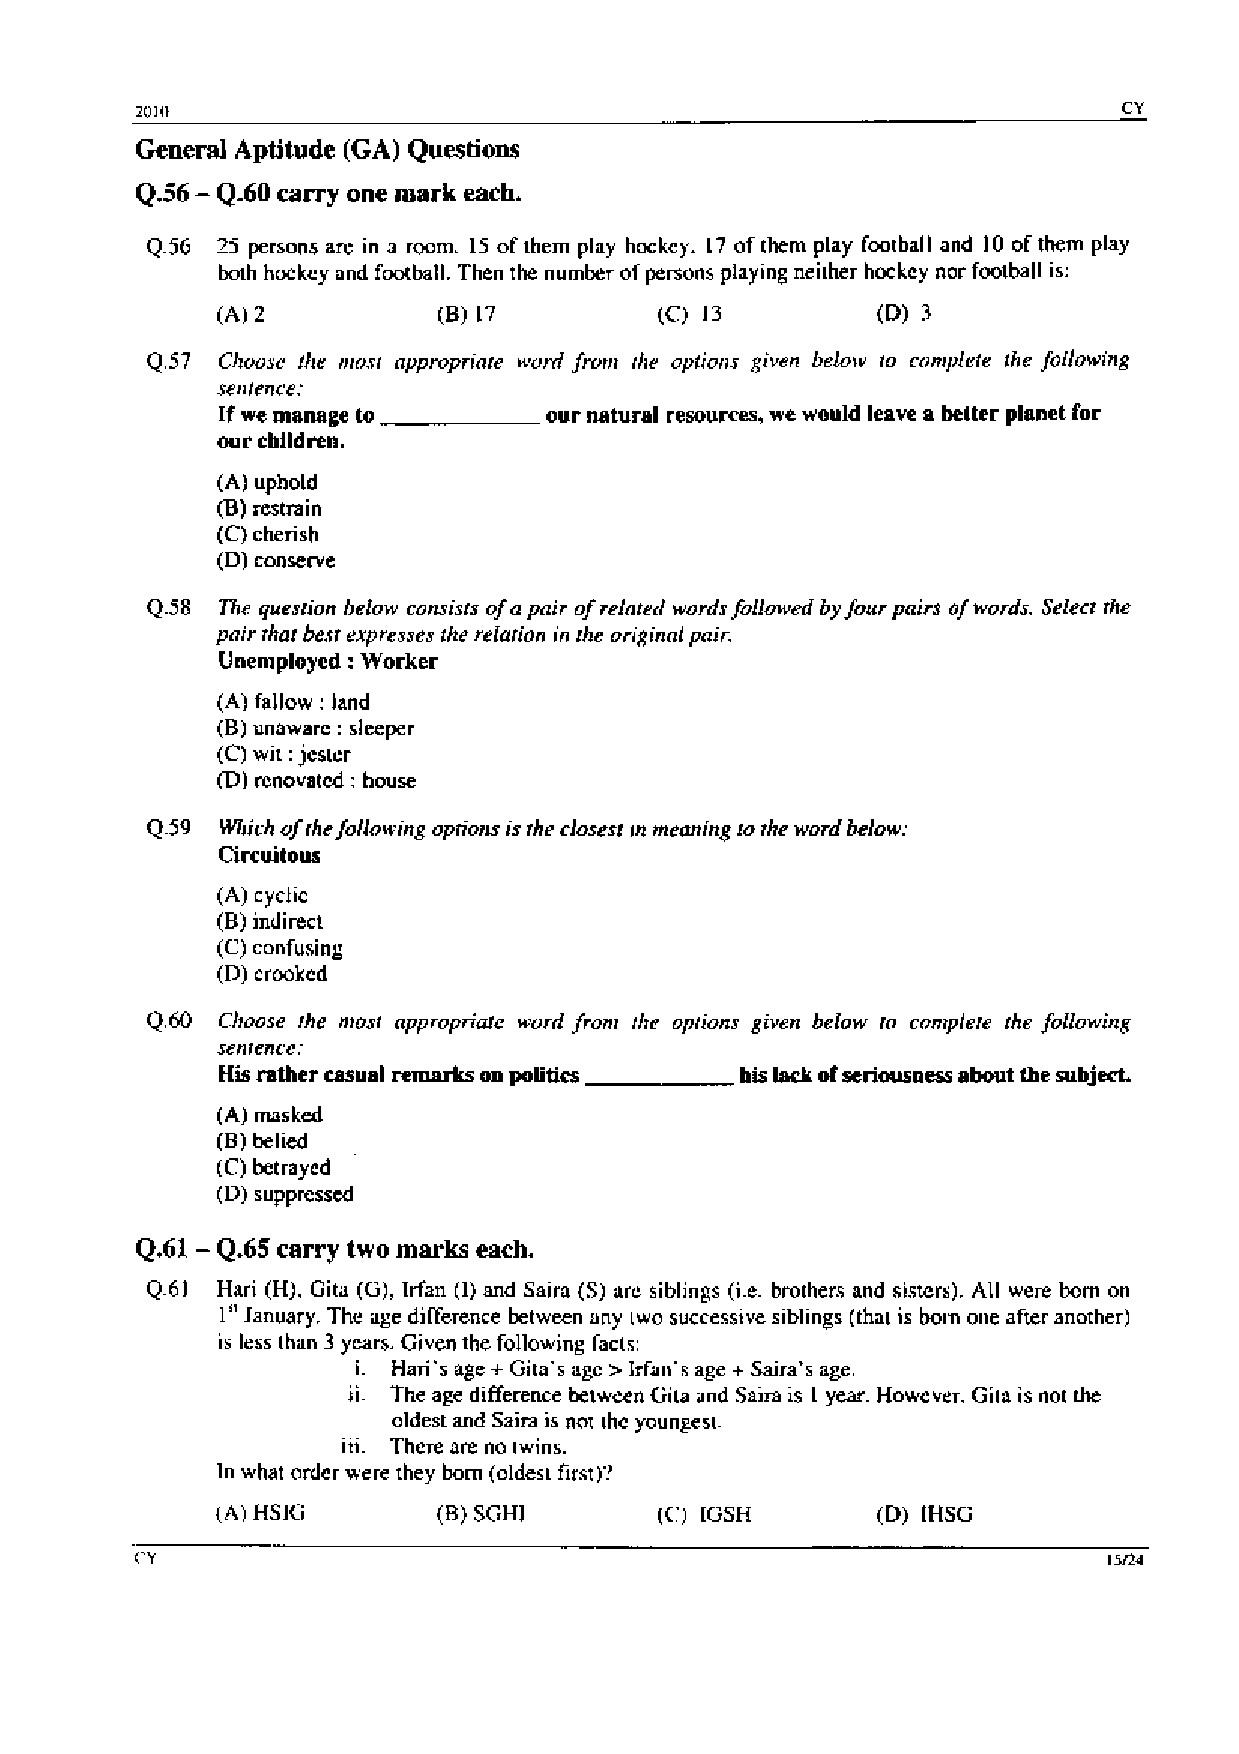 GATE Exam Question Paper 2010 Chemistry 15